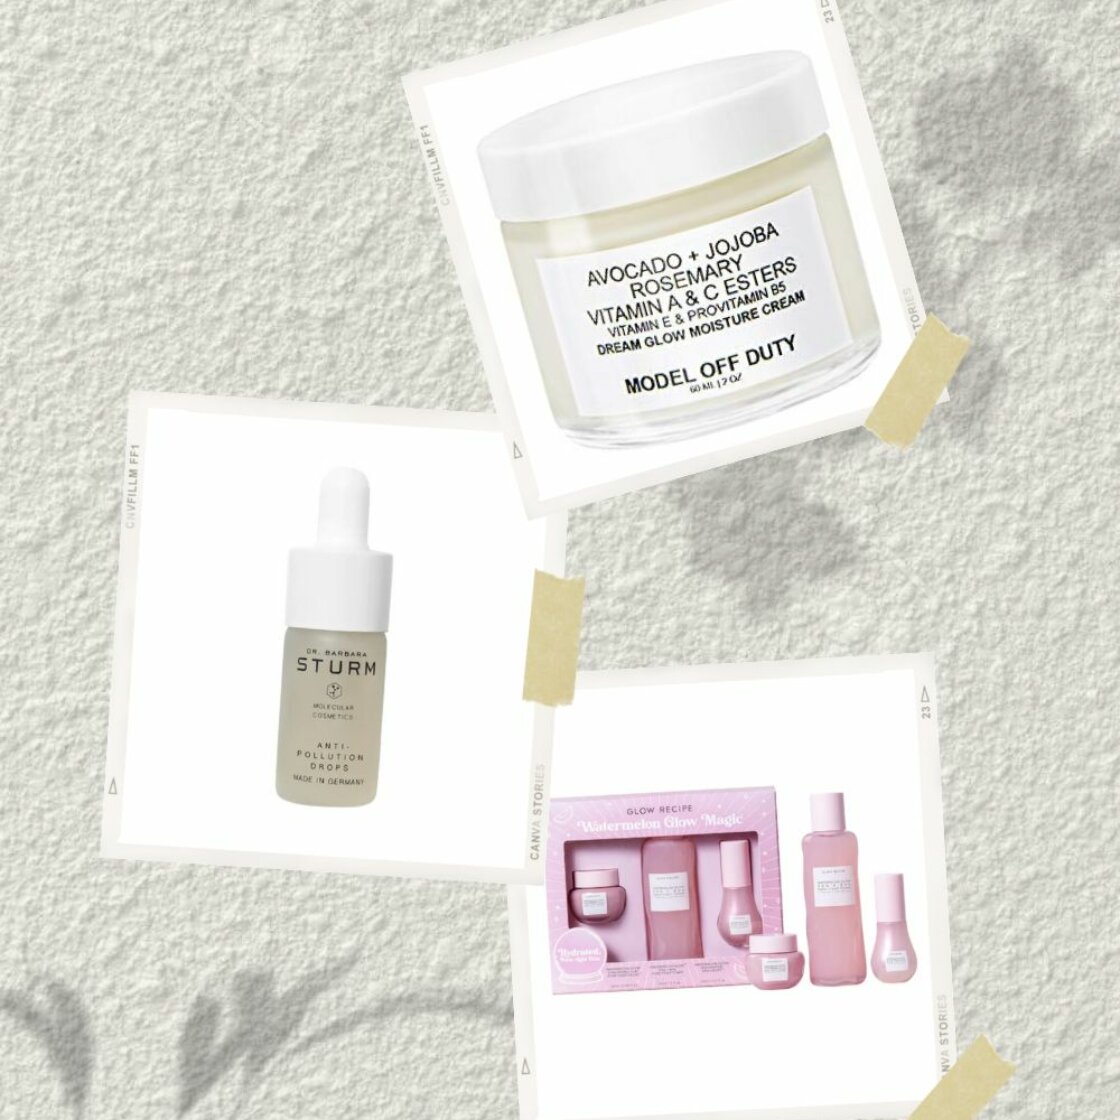 7 Classic Skincare Gifts That Fit Your Budget